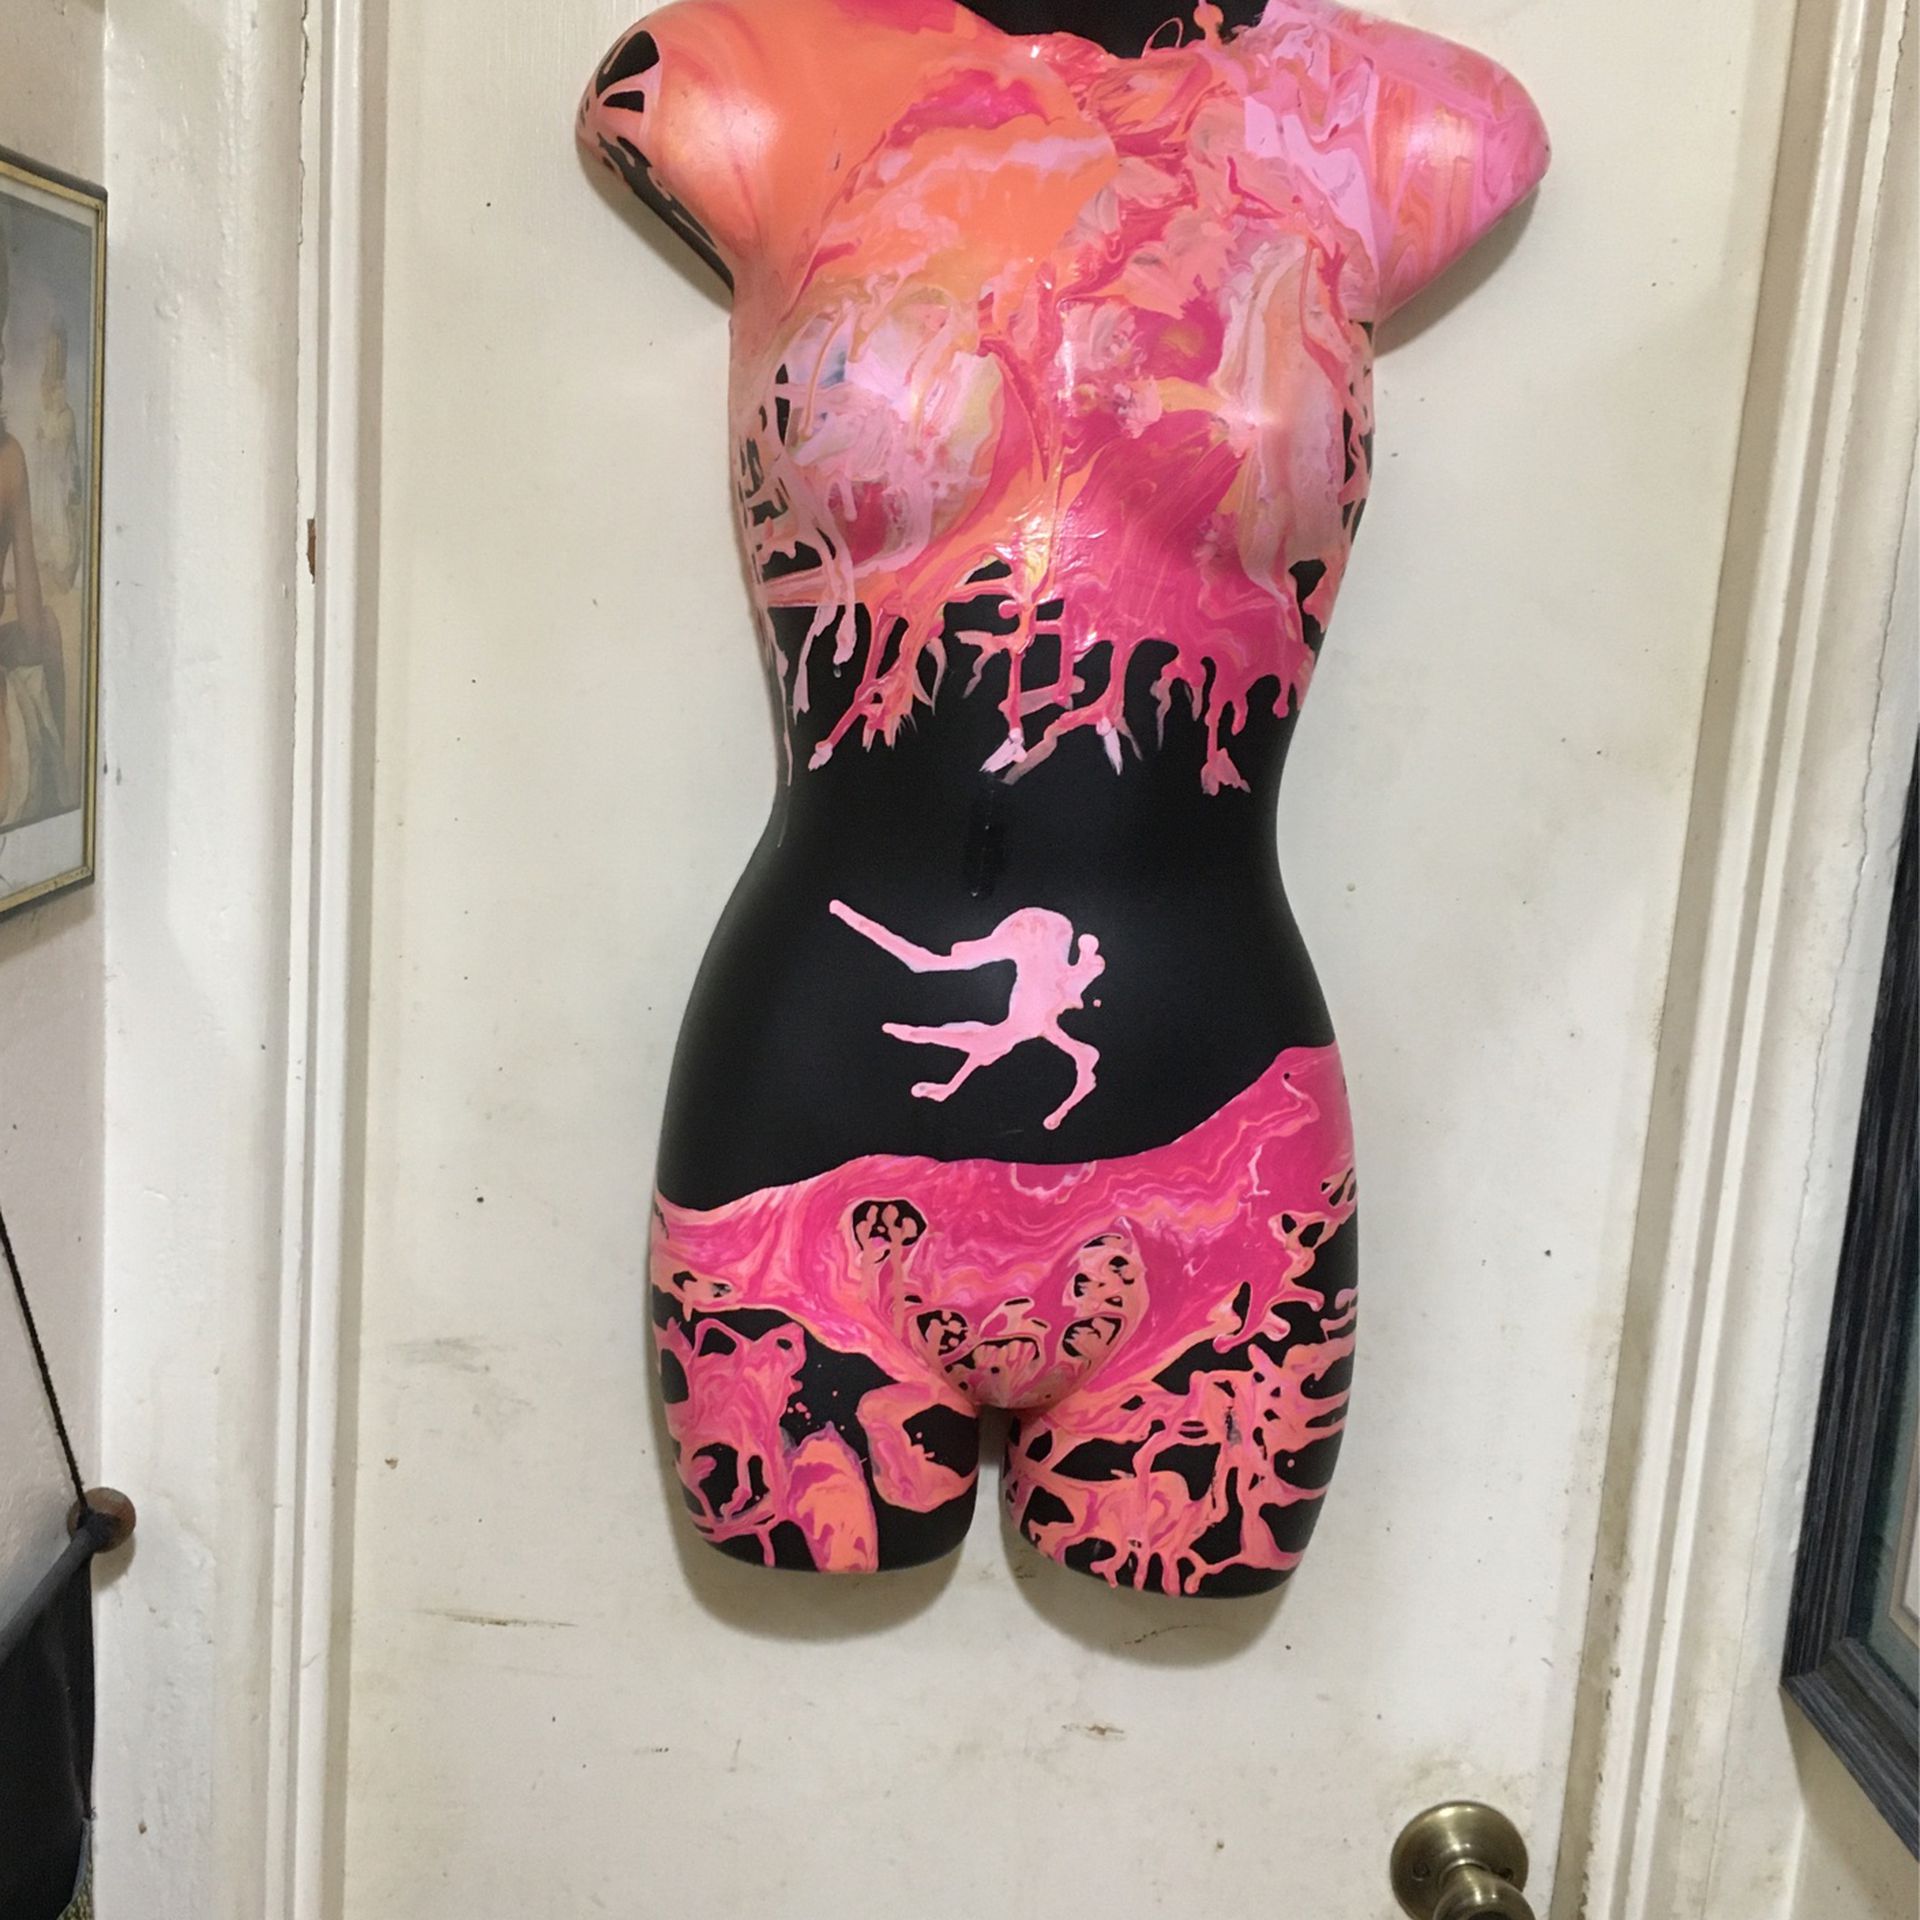 Artist flow painted Female Maniquin 29 inch